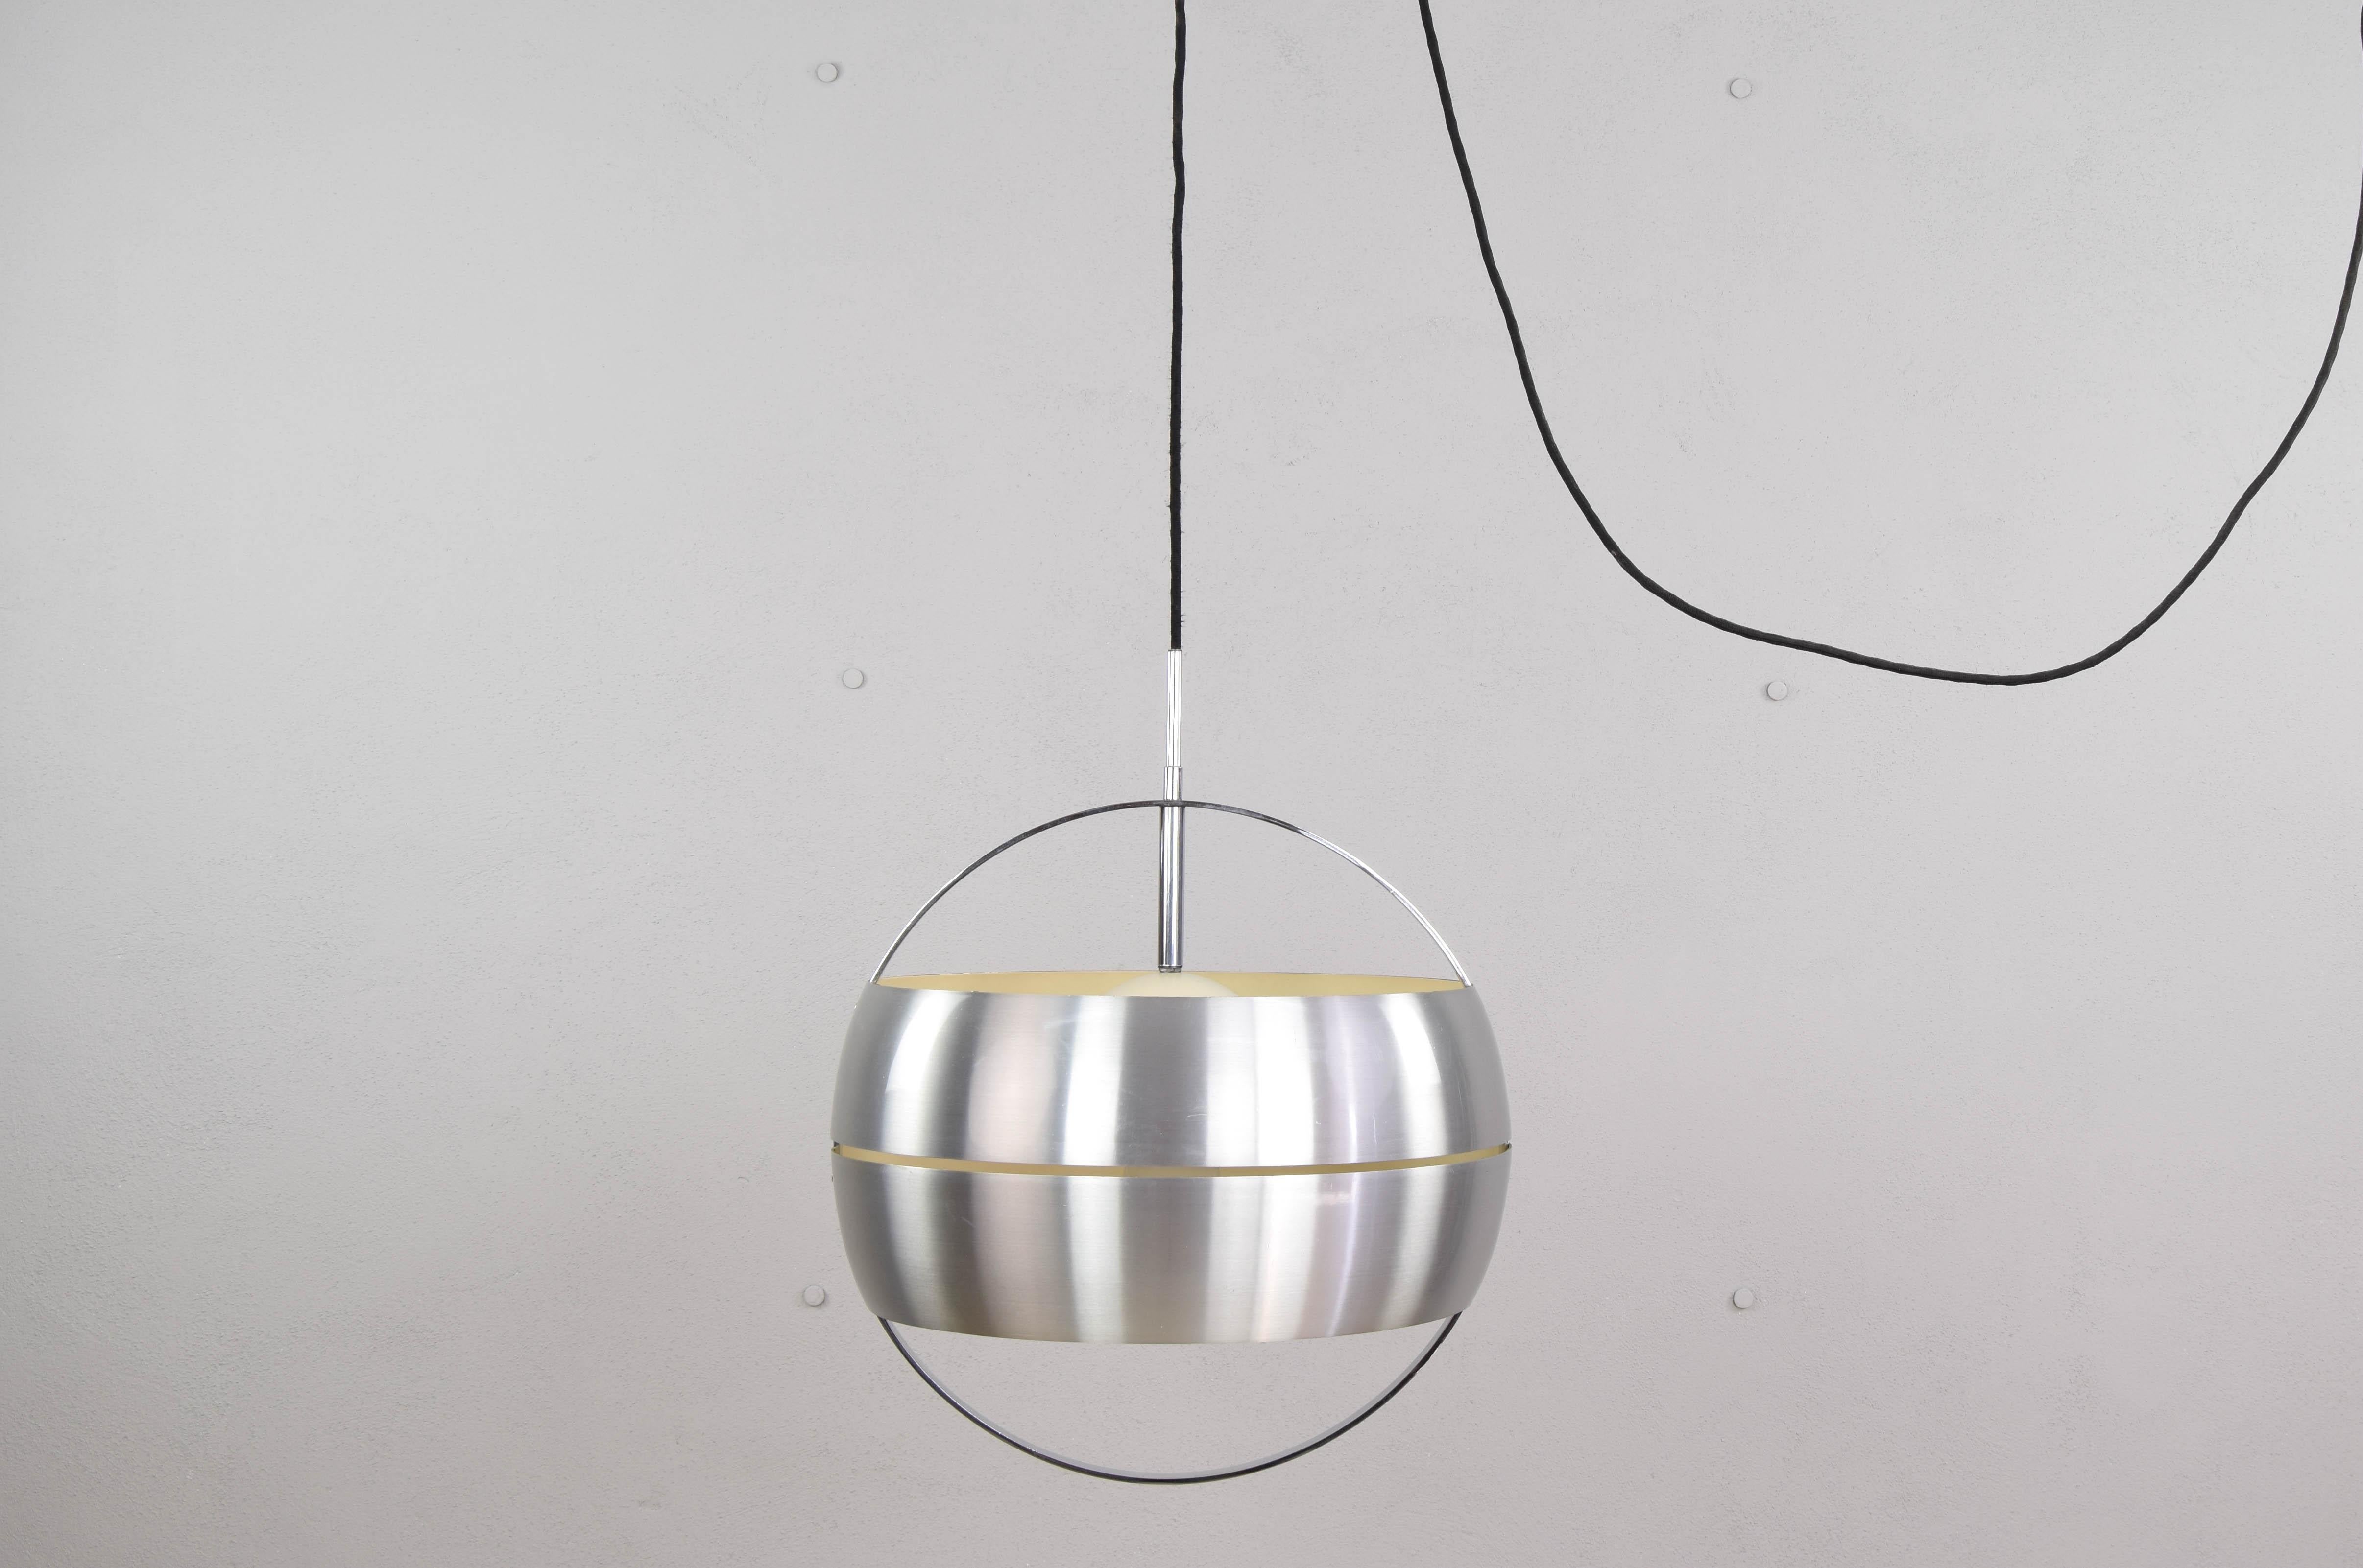 Italian pendant ceiling lamp of great extension. Brushed steel body with chrome ring in very good condition. 470 cm fabric cable extension with anchoring system to be able to regulate the measure of lamp drop.